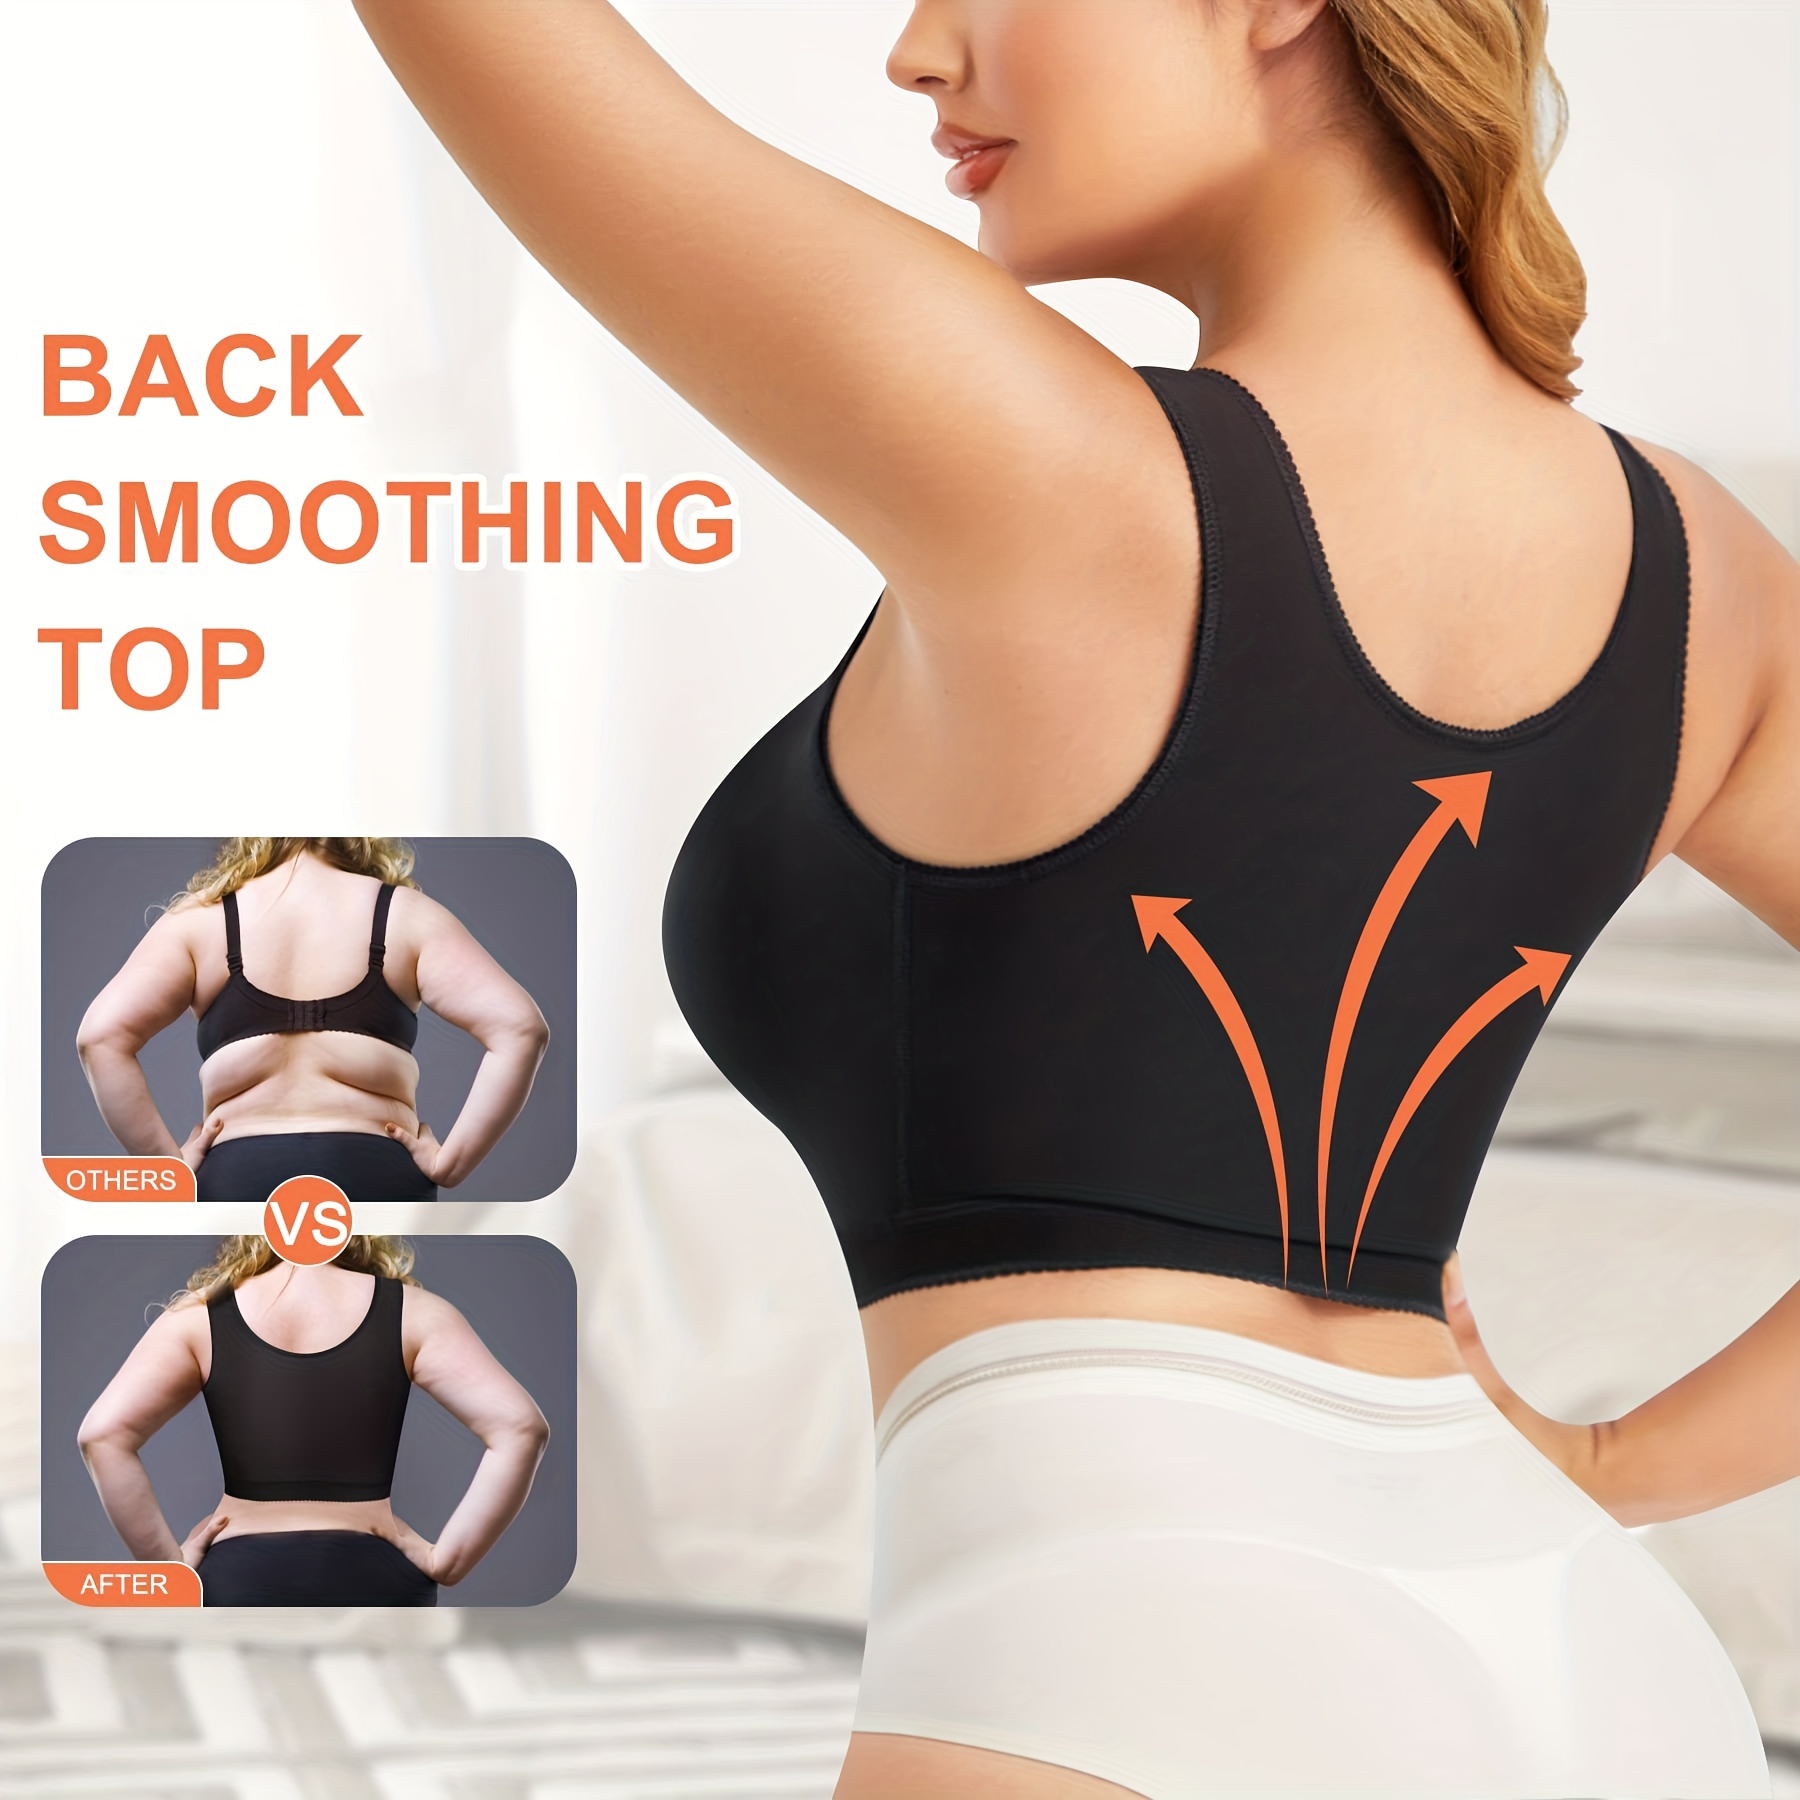 Buy 1 Get 2 Free😍Posture Correcting Front Buckle Bra  🤩A 70-Yr-old  grandmother designed and development Women's Posture Correcting Front  Buckle Bra - Only for the big beautiful queen!💃Buy 1 Get 2